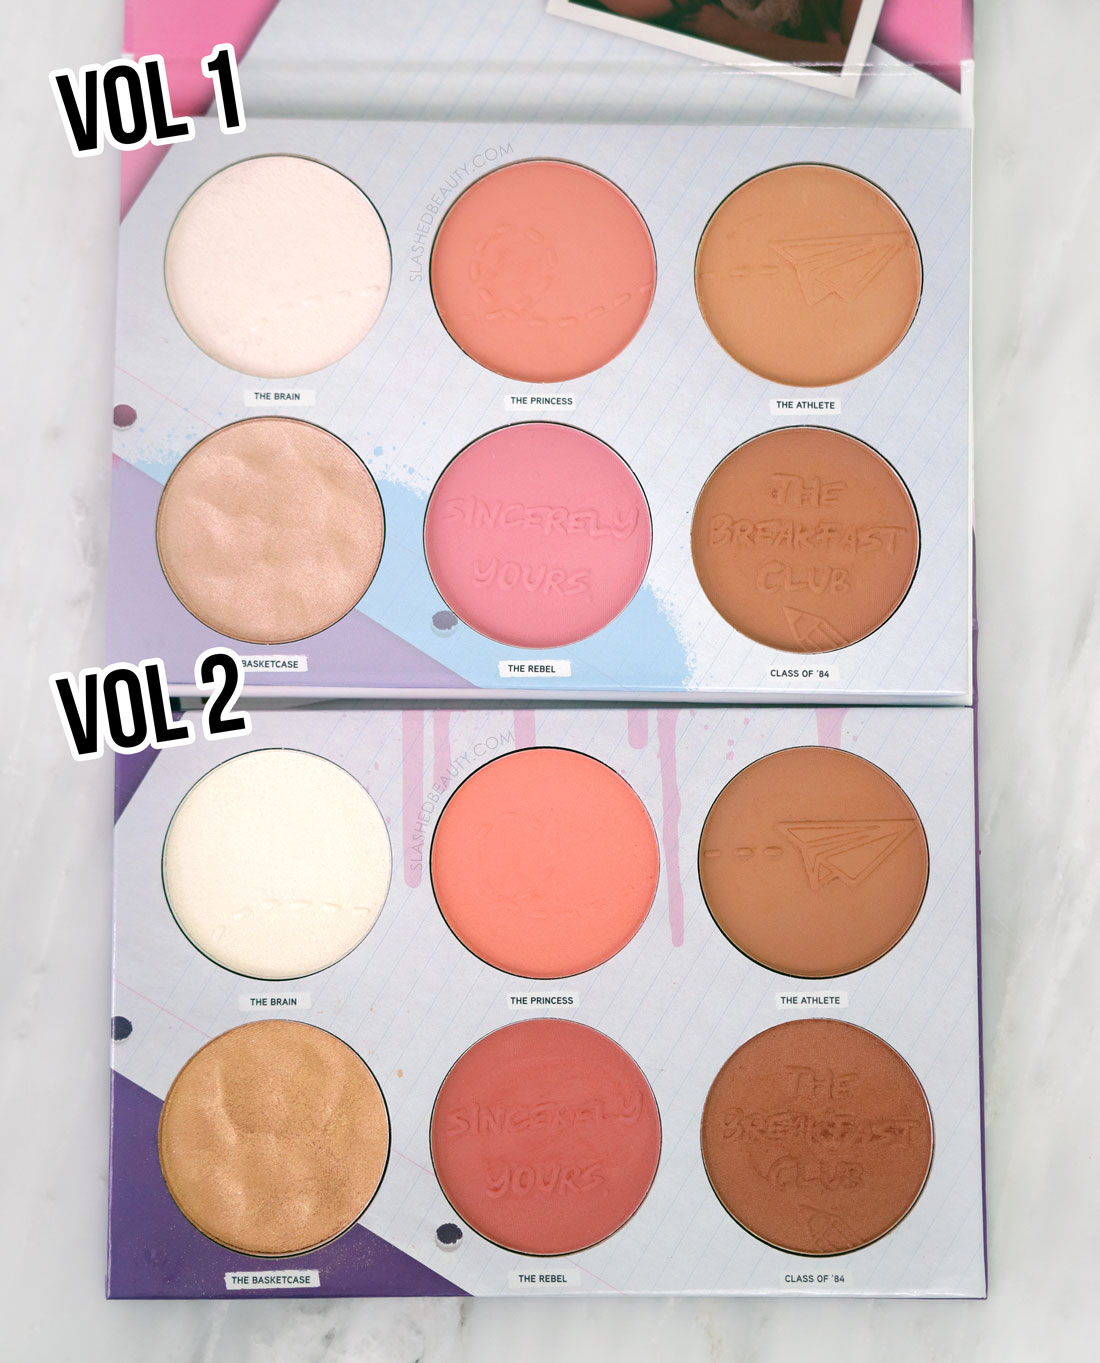 Physicians Formula Breakfast Club Saturday Detention Palettes Volume 1 and Volume 2 lying open next to each other | Did Physicians Formula Secretly Release a Fragrance-Free Butter Bronzer? | Slashed Beauty